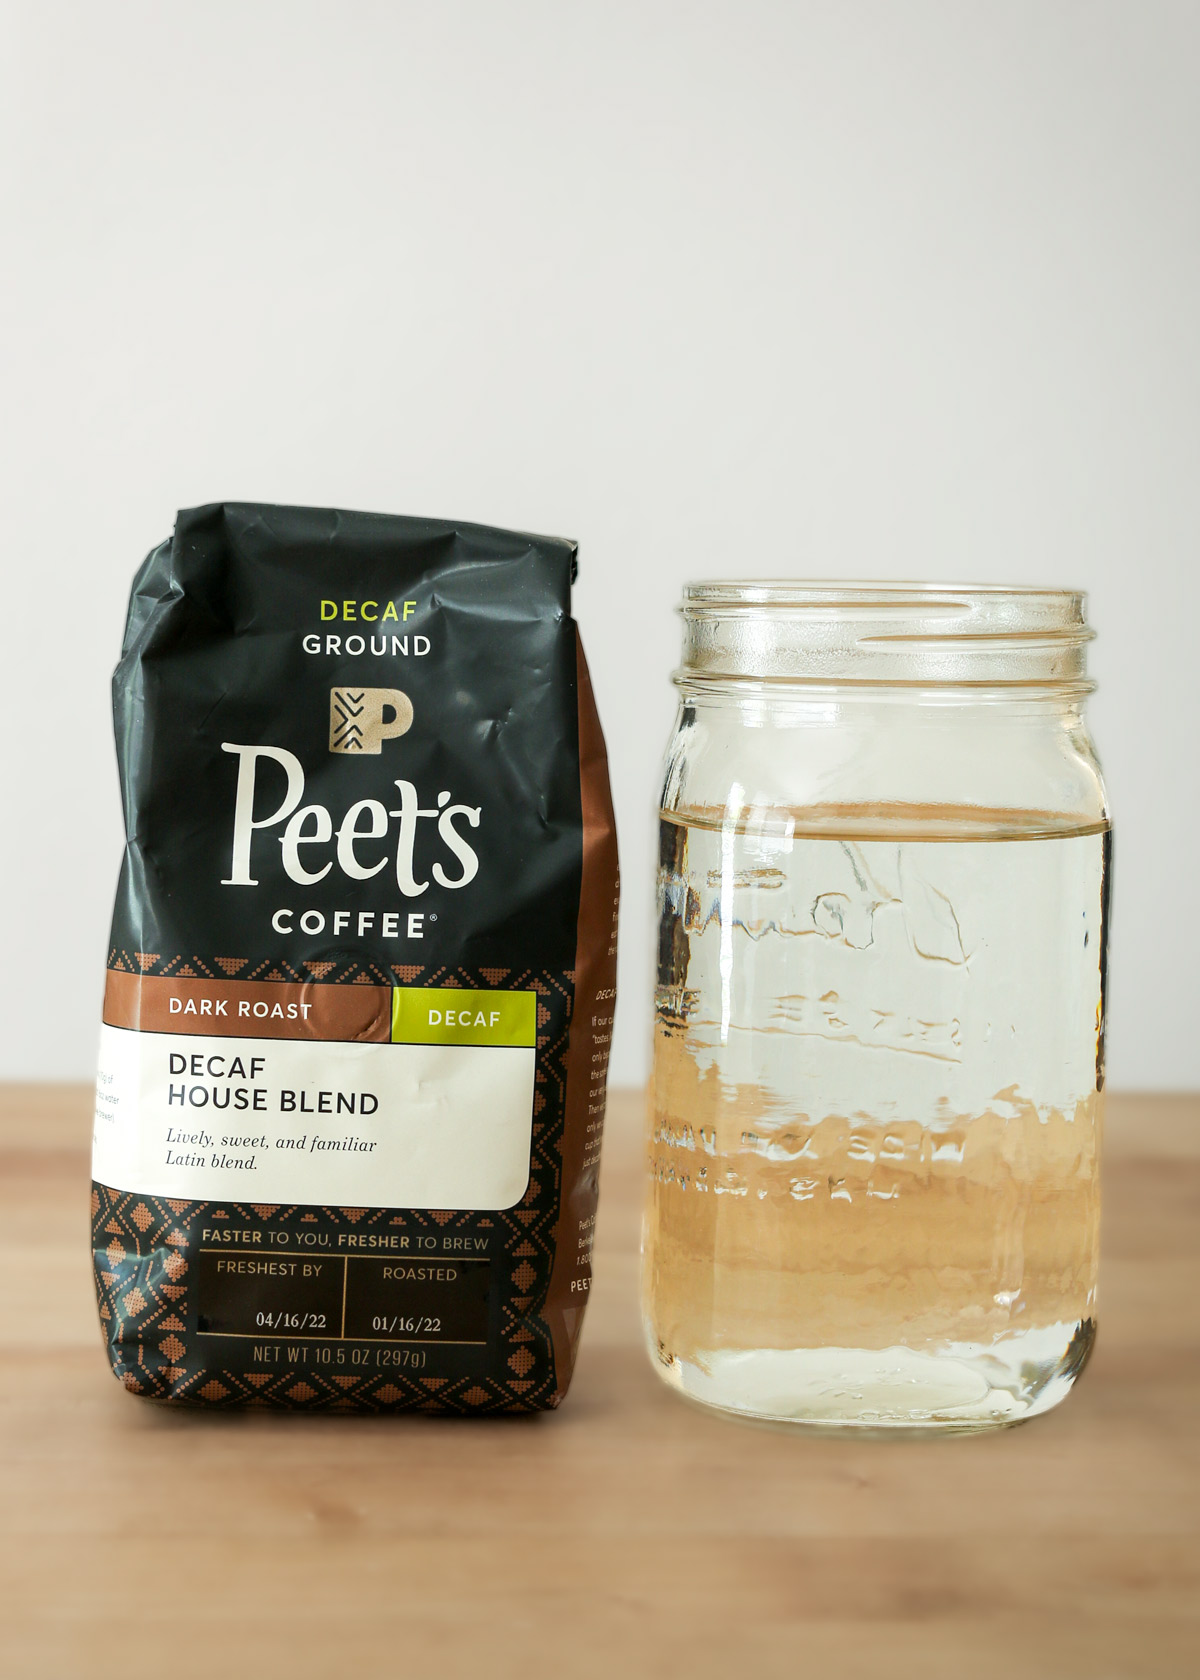 bag of decaf Peets coffee on counter next to quart of water.